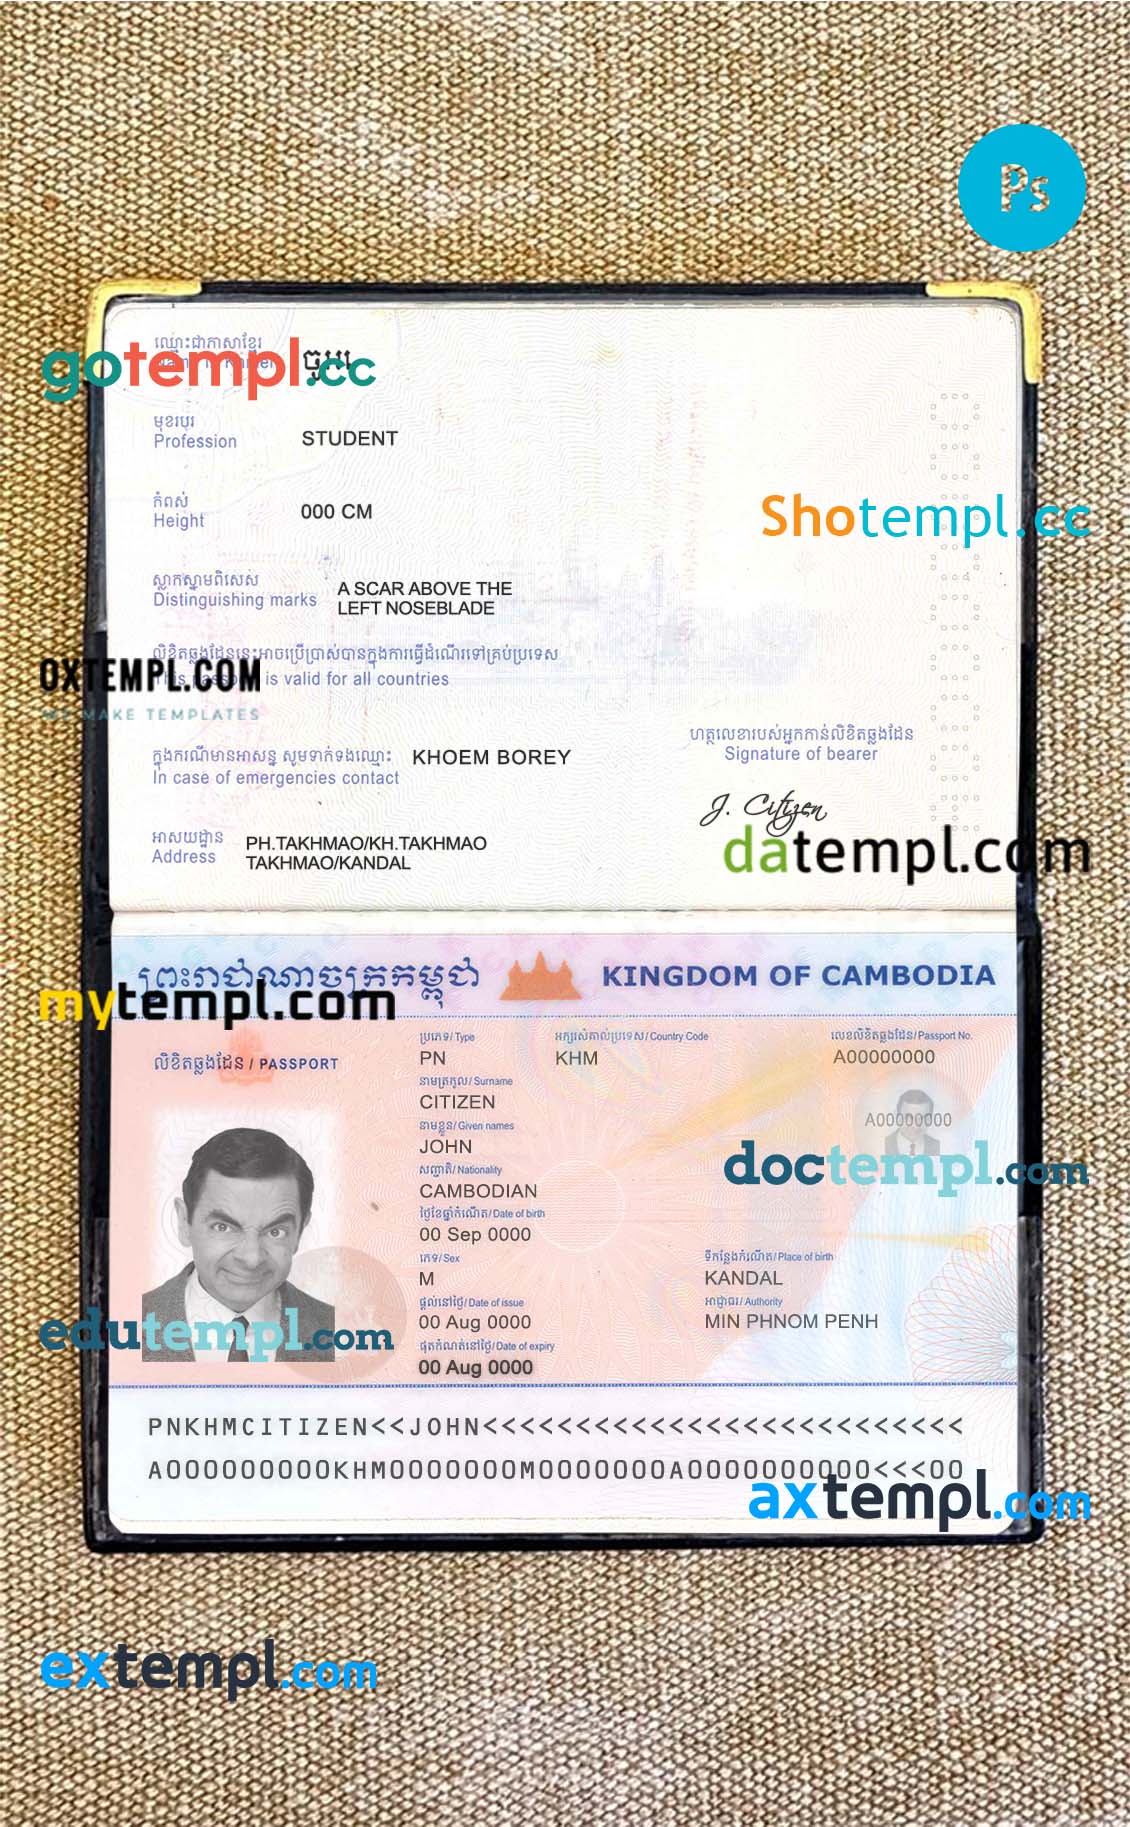 Turkey passport PSD files, scan and photograghed image, 2 in 1